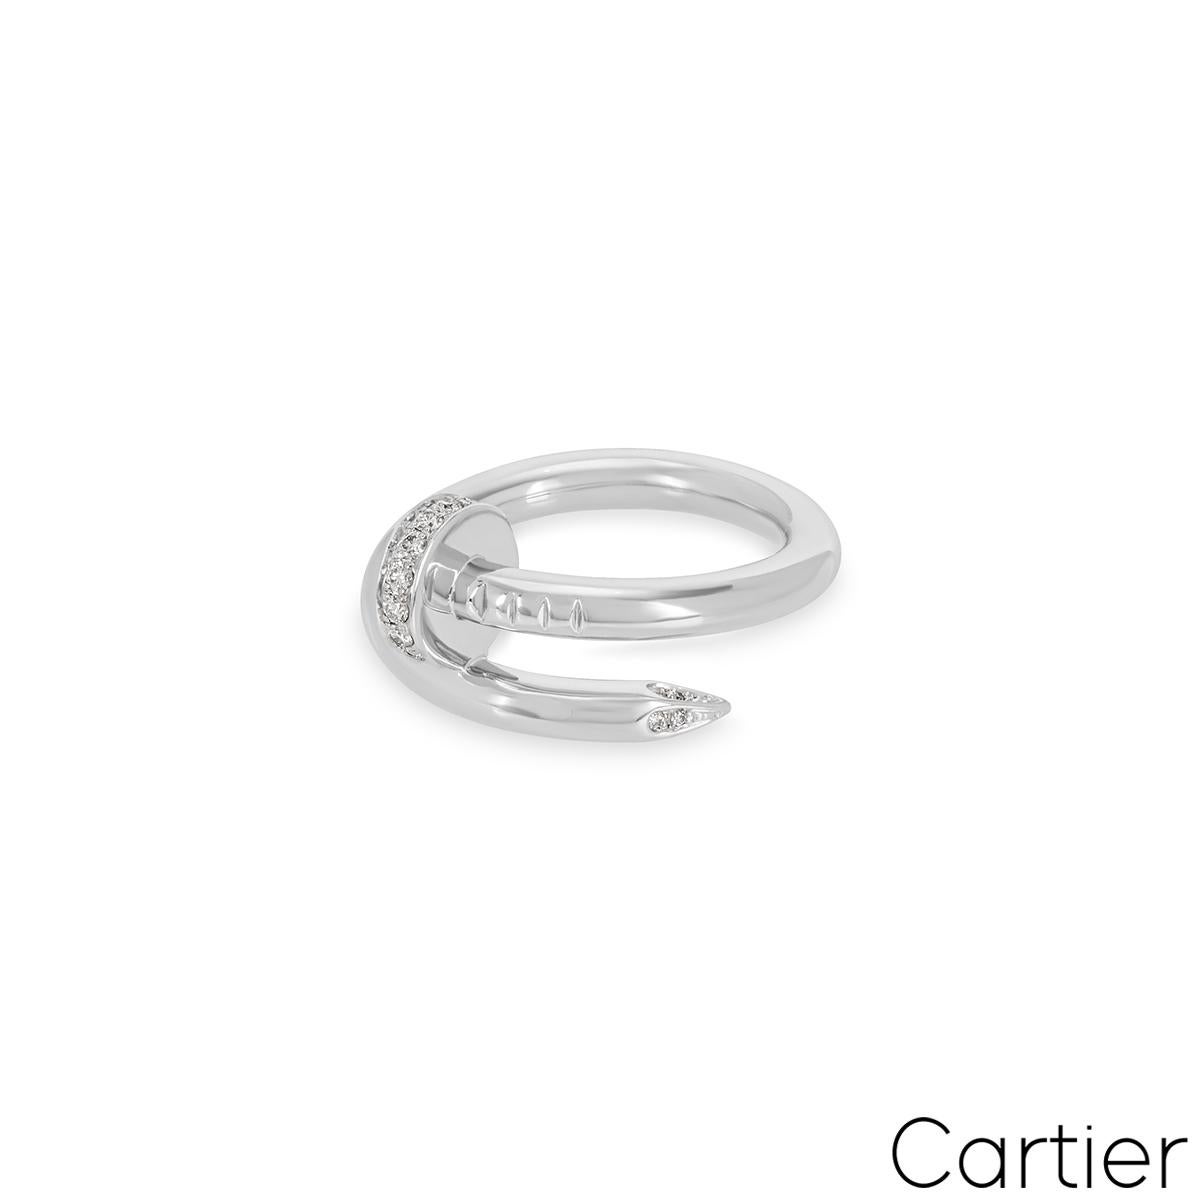 Cartier White Gold Diamond Juste Un Clou Ring B4092700 In Good Condition For Sale In London, GB